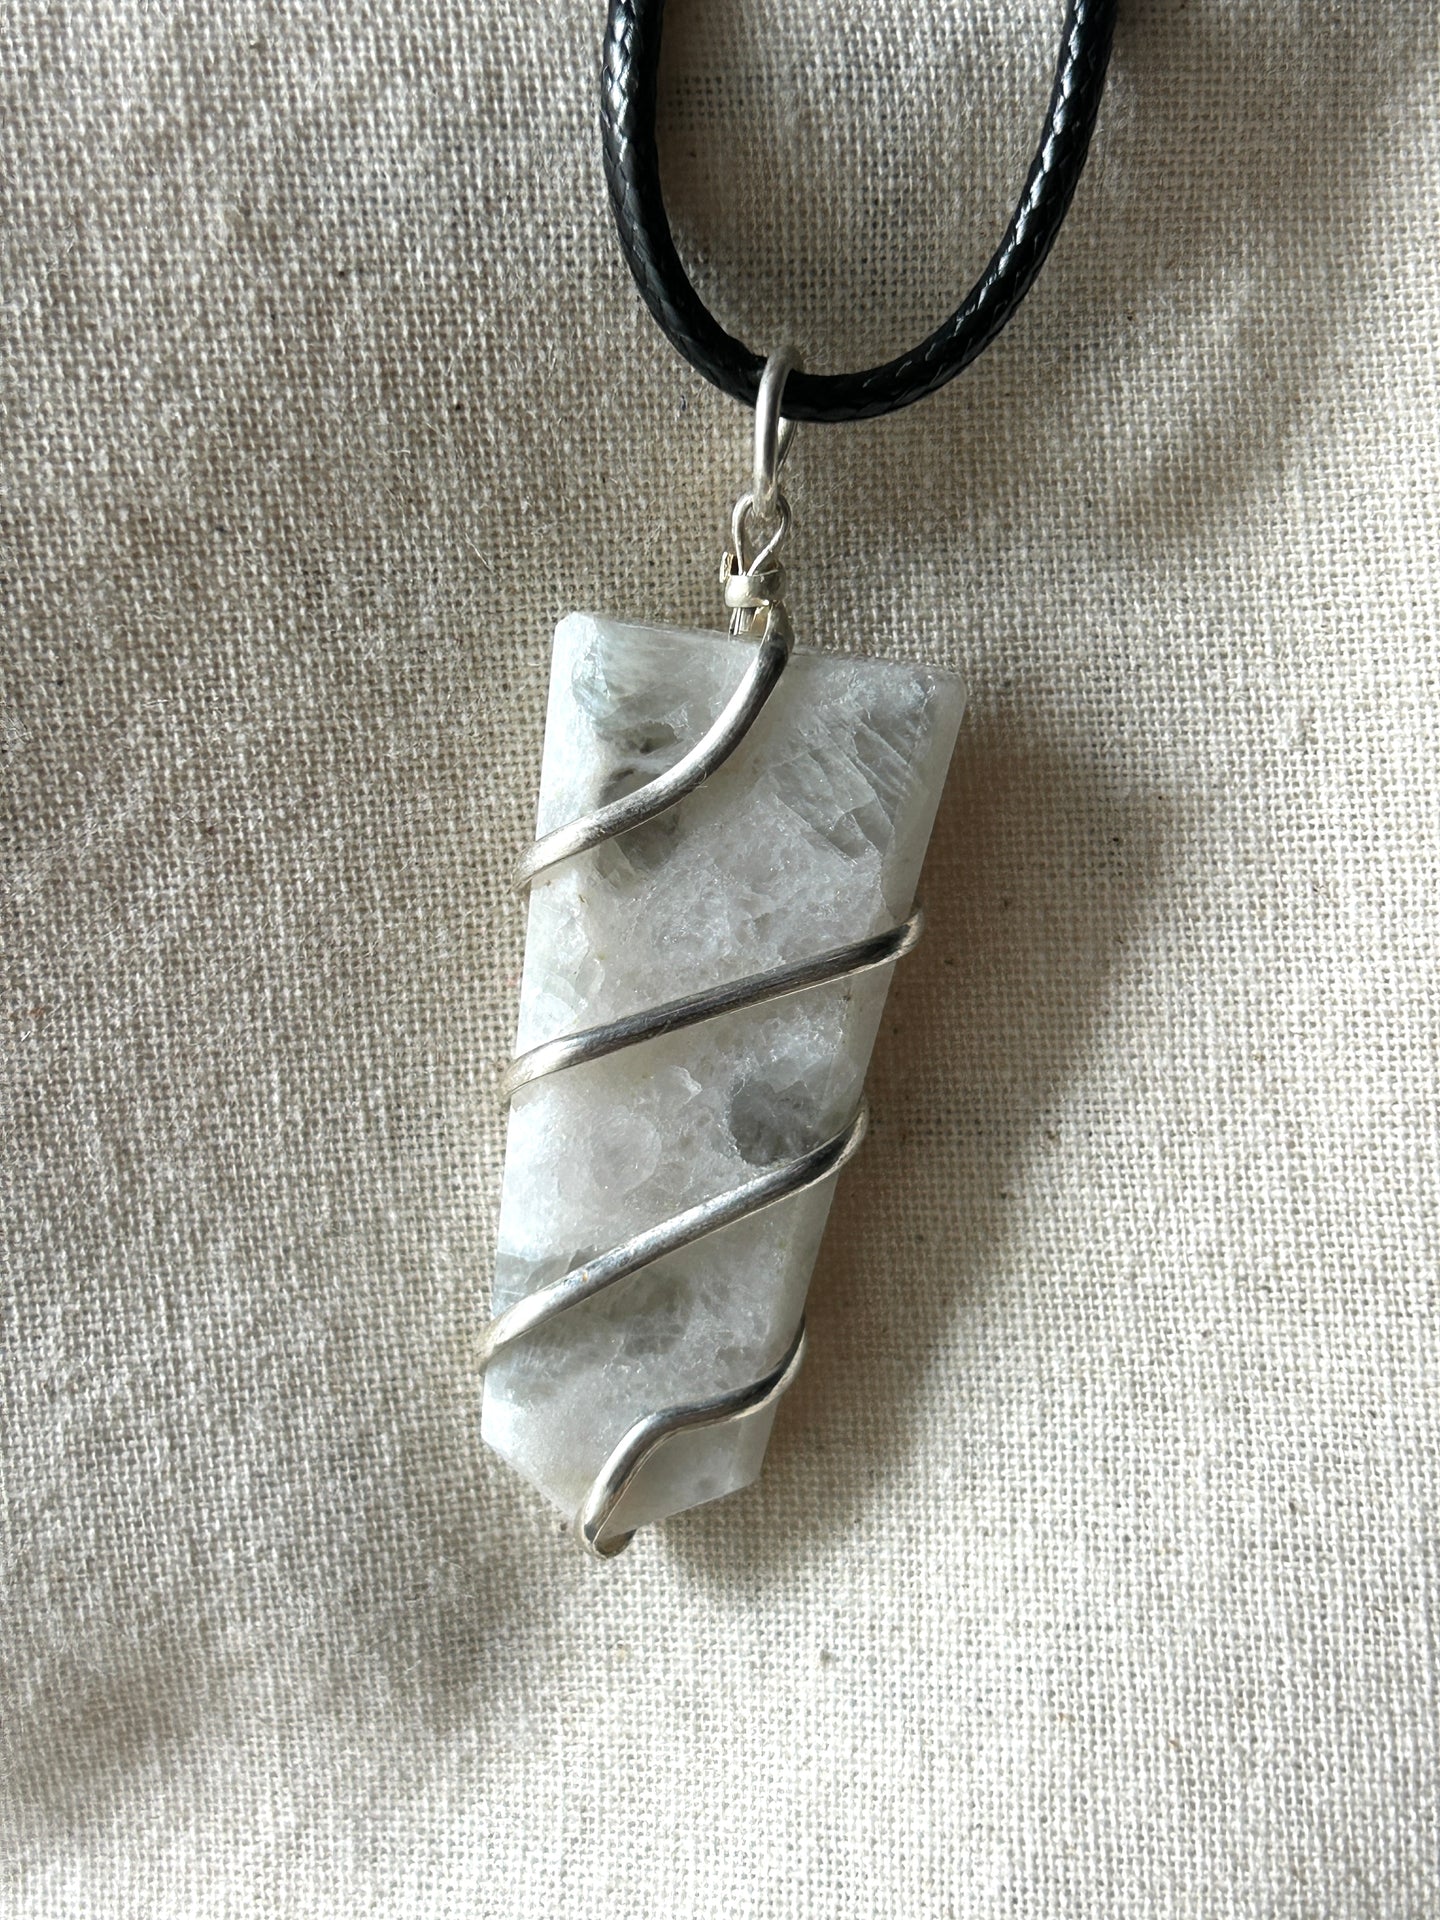 Moonstone Flat Spiral wrap necklace